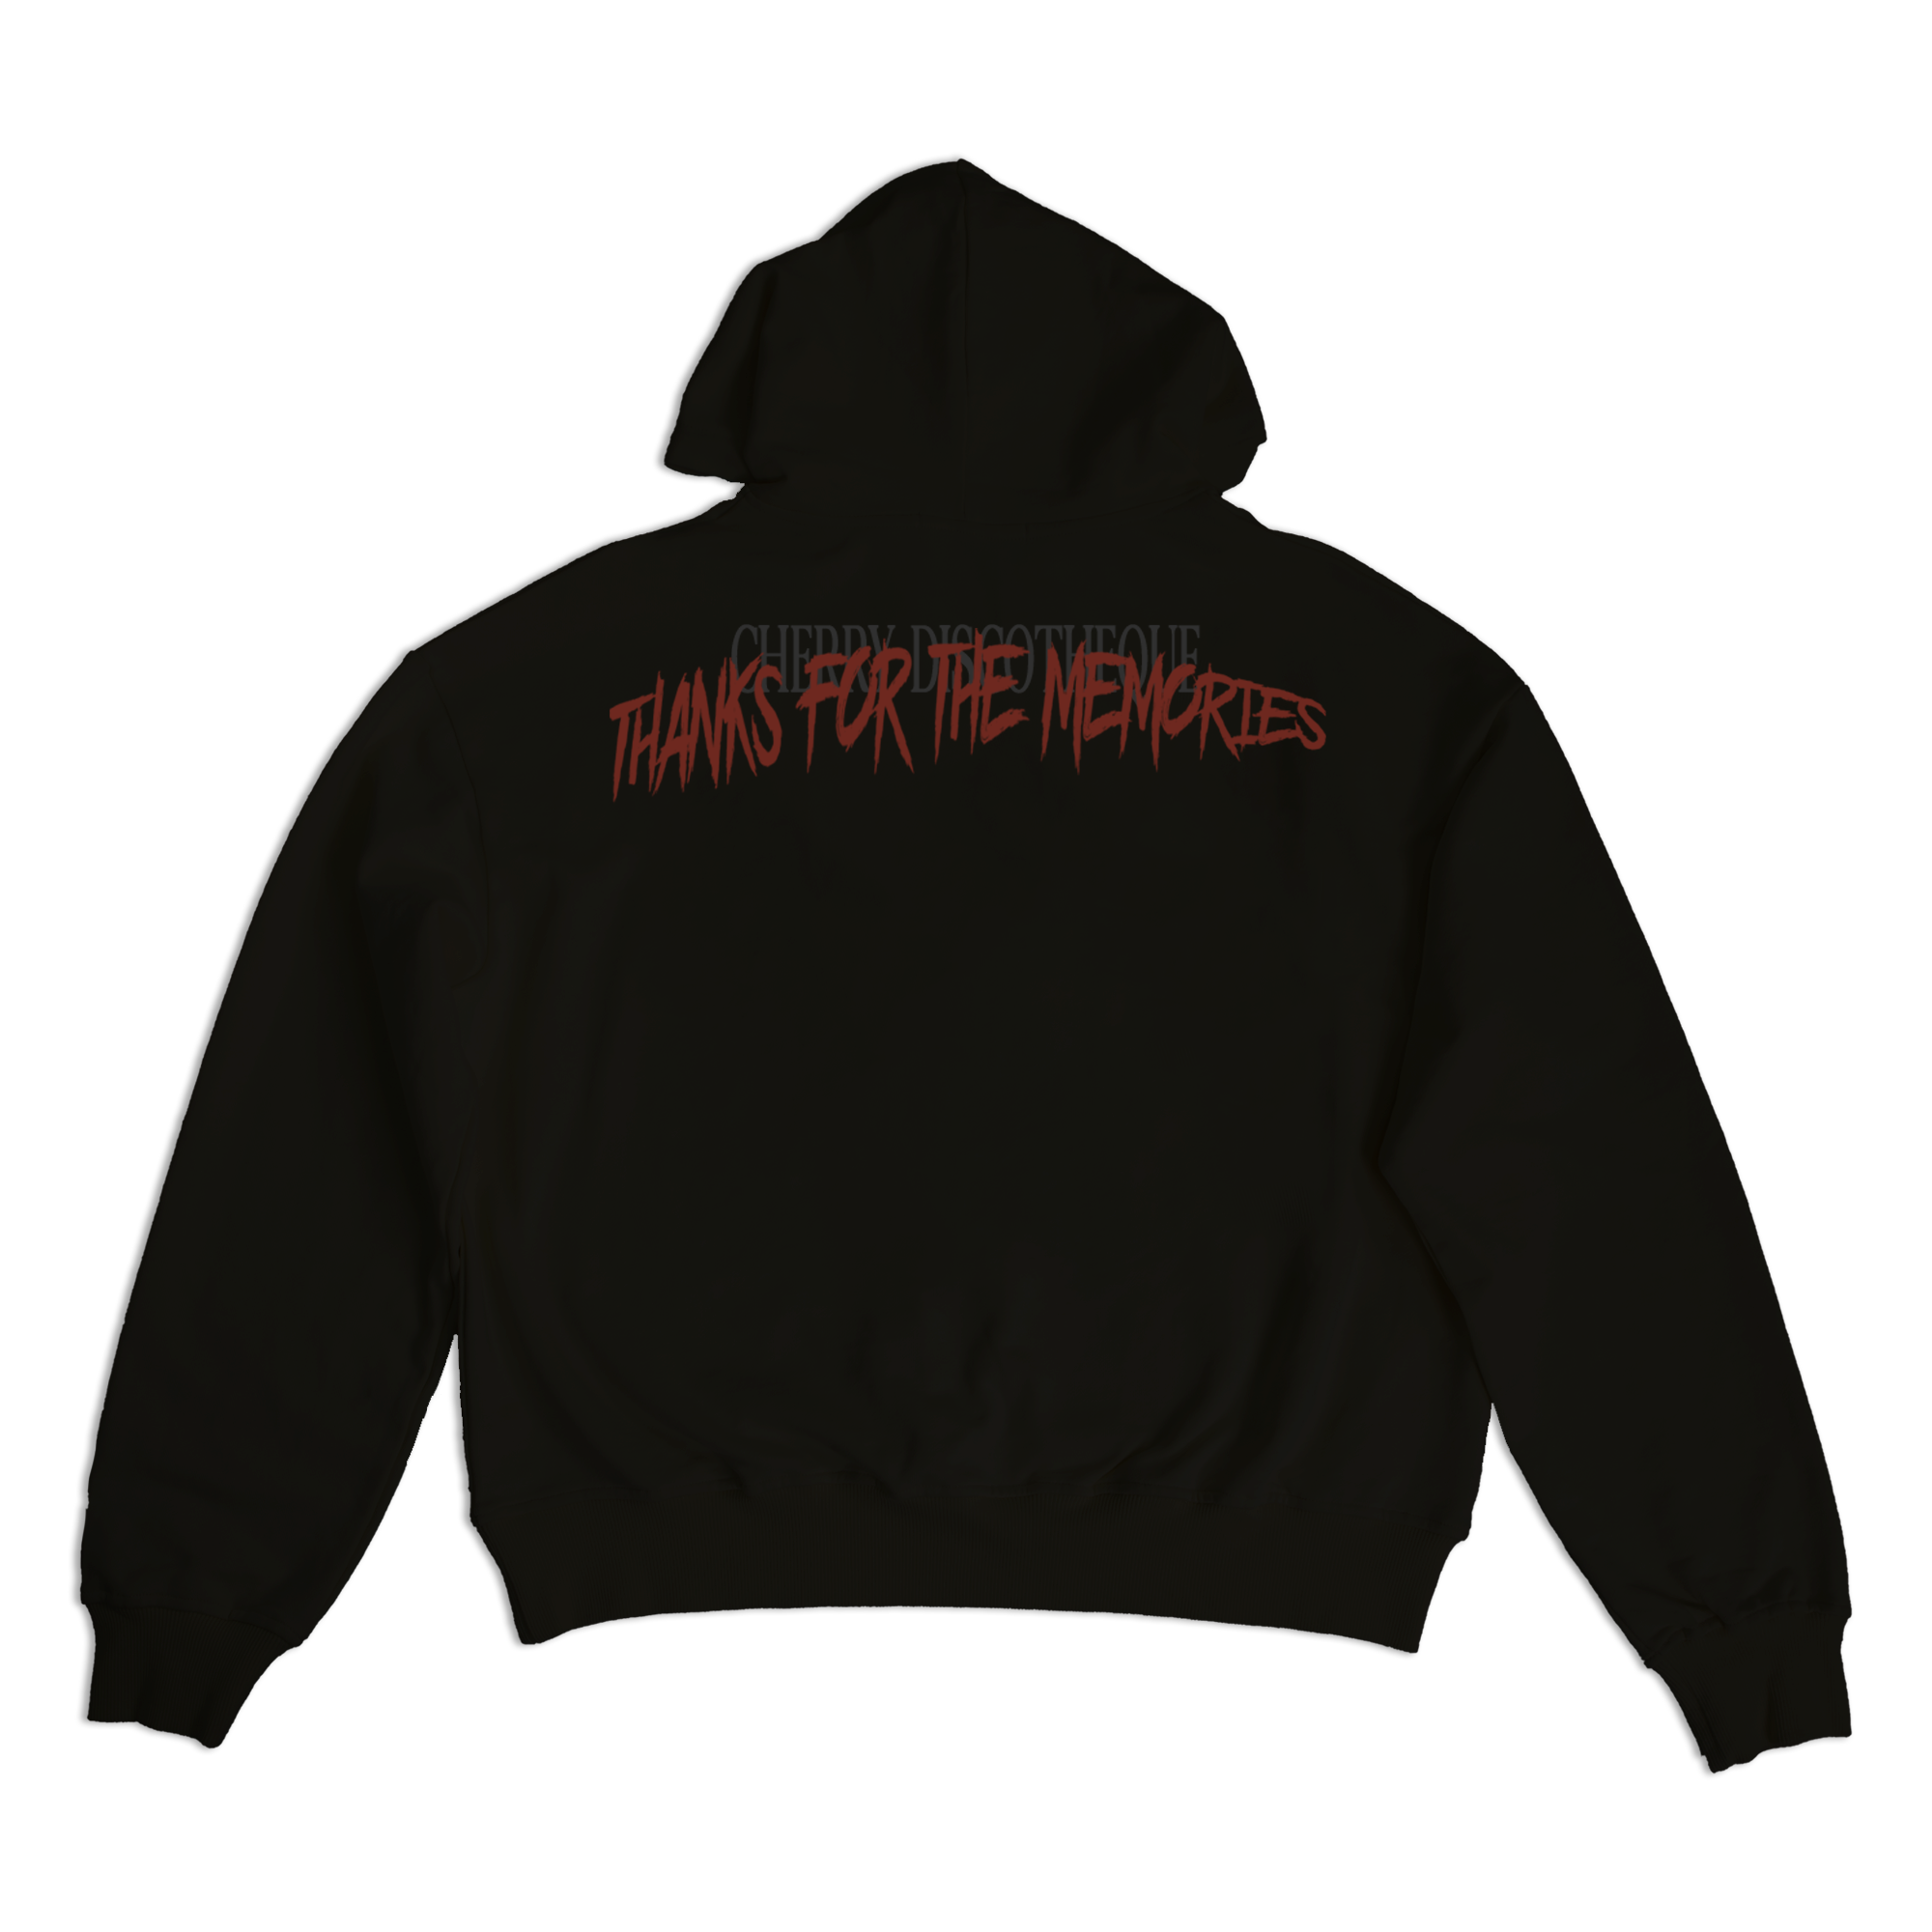 THANK FOR THE MEMORIES HOODIE IN BLACK